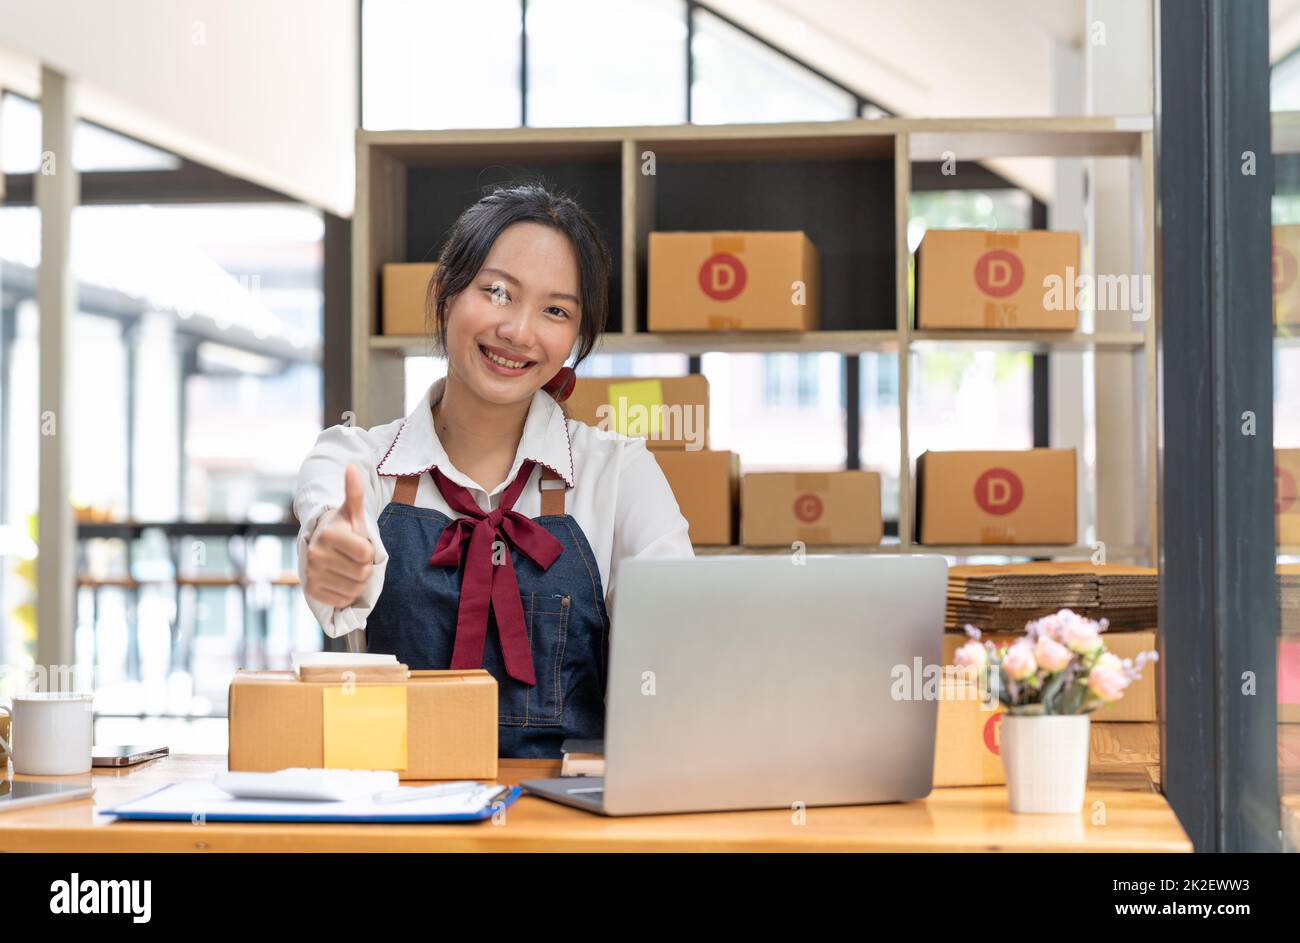 Happy successful SME entrepreneur with thumps up, Home office, Business online and delivery, Selling online, Startup small business concept. Stock Photo